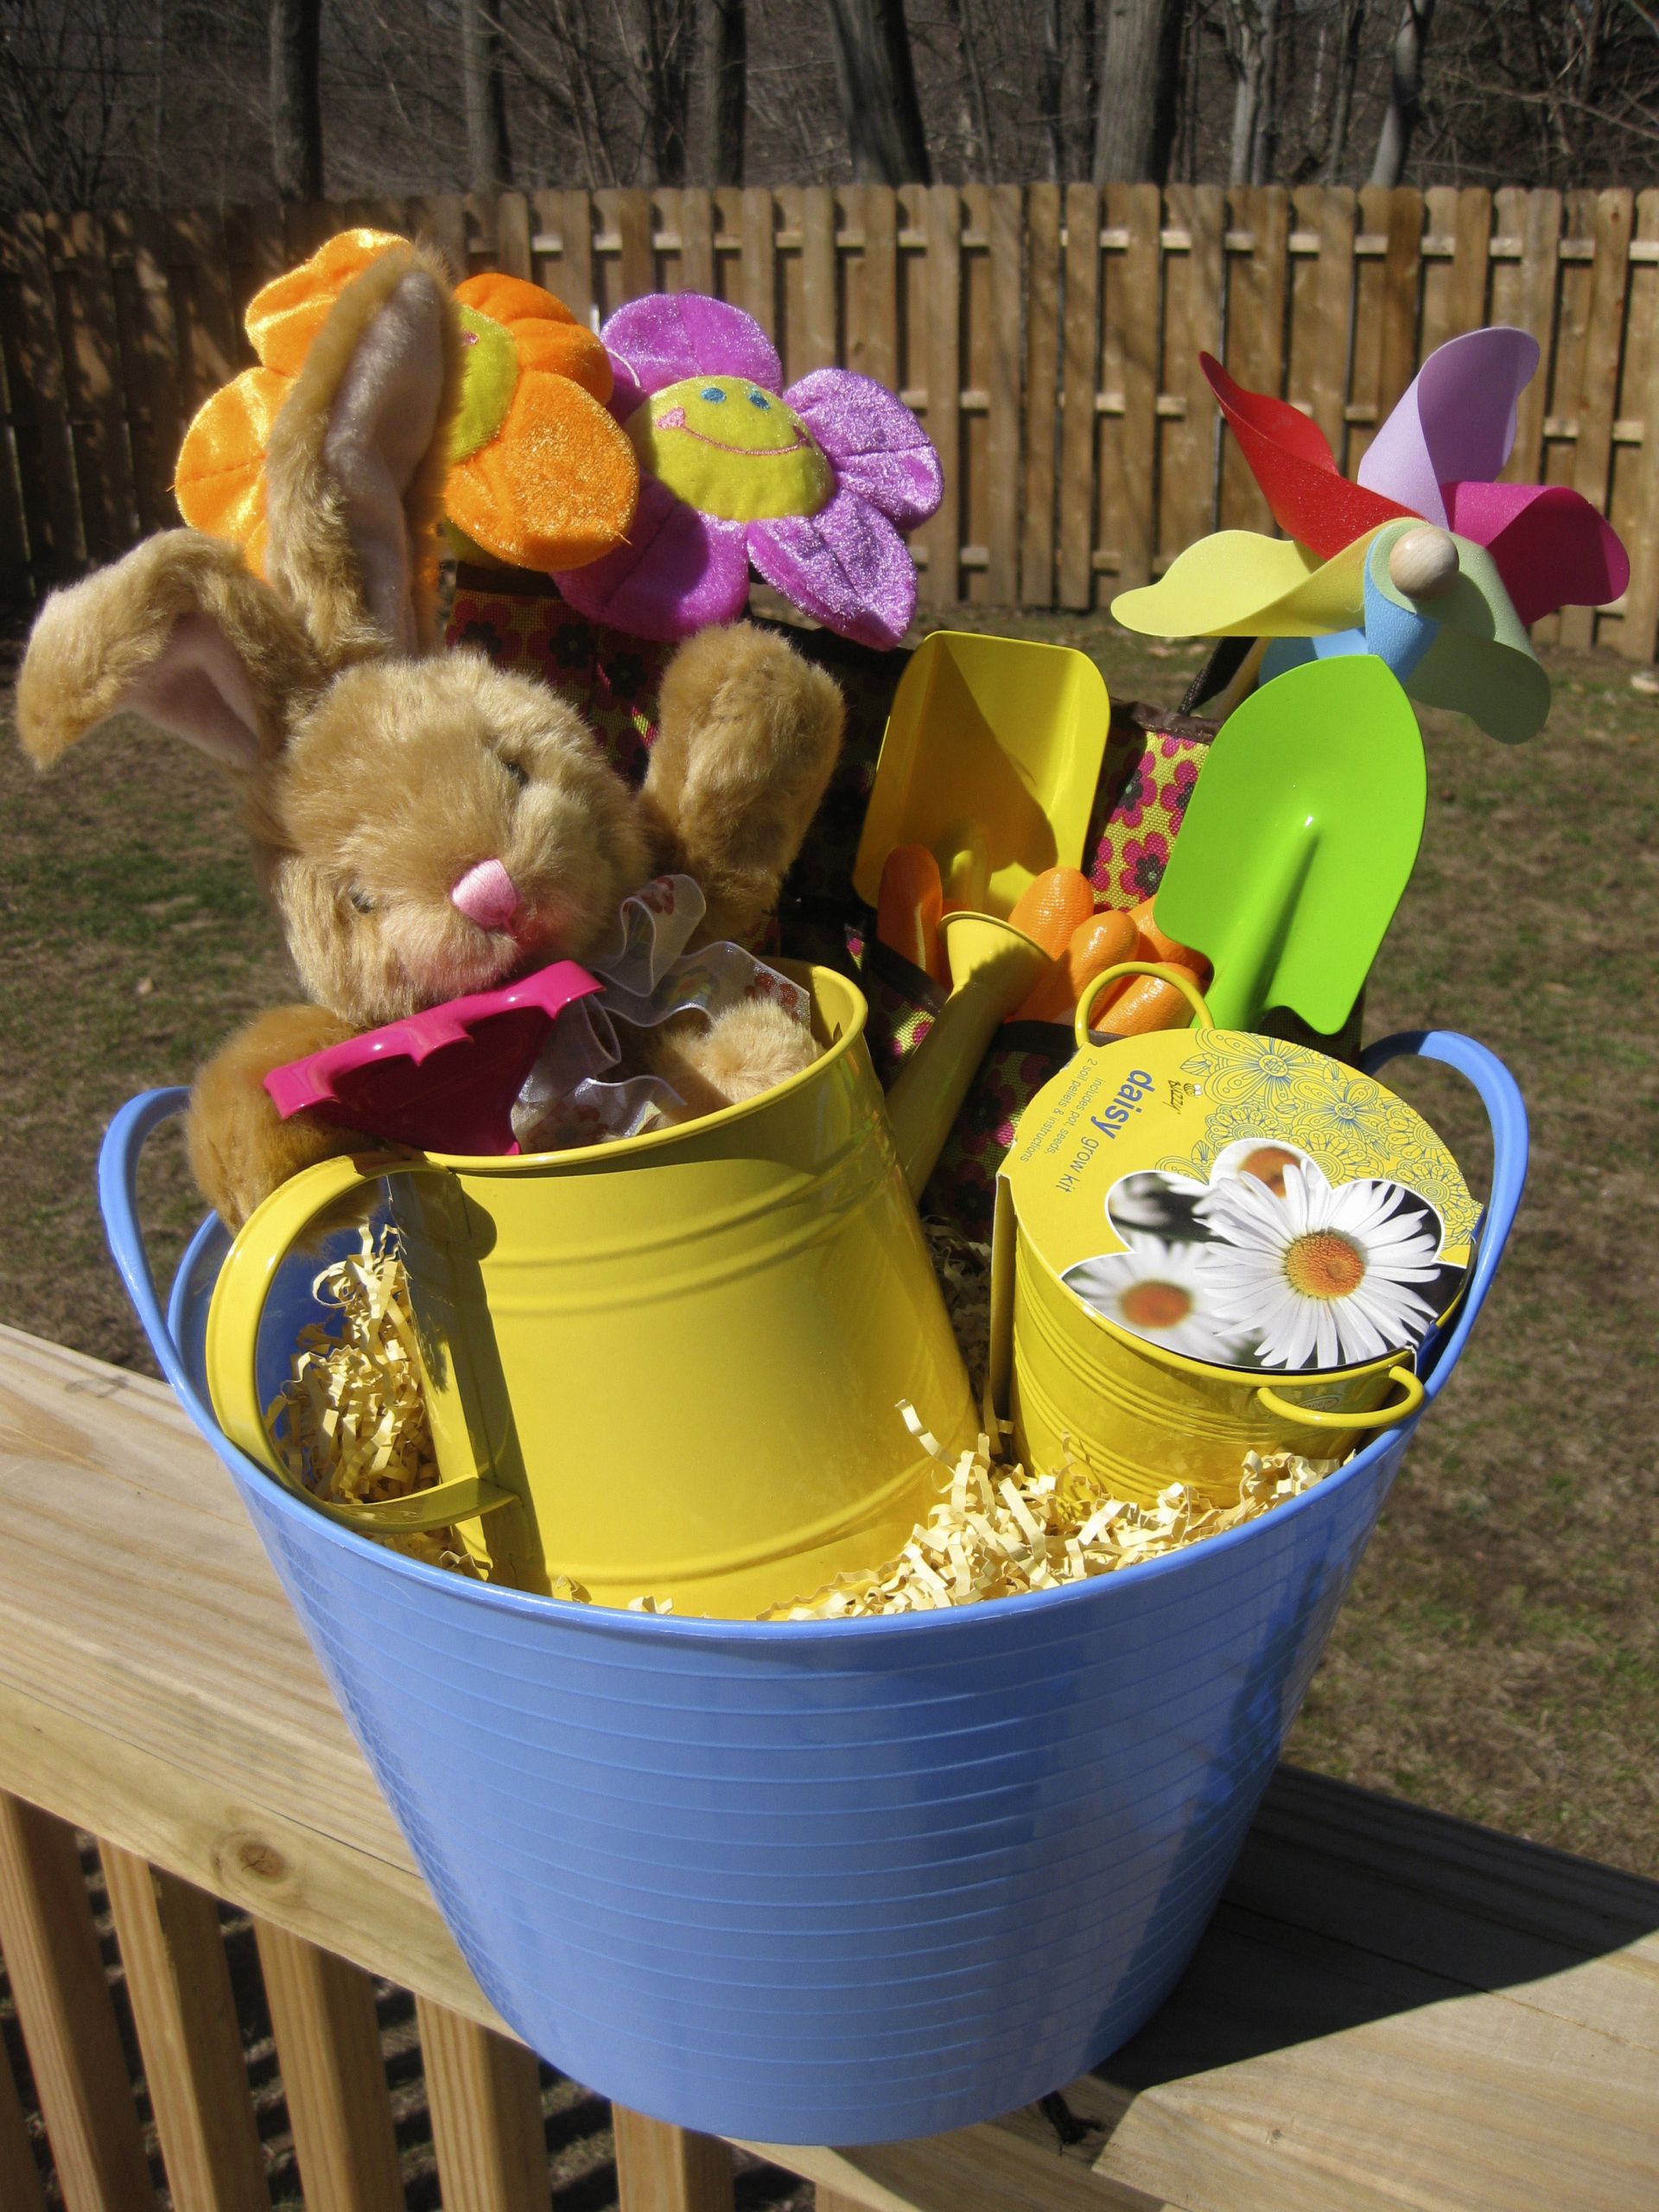 Small Easter Gifts
 Baskets without candy still fun